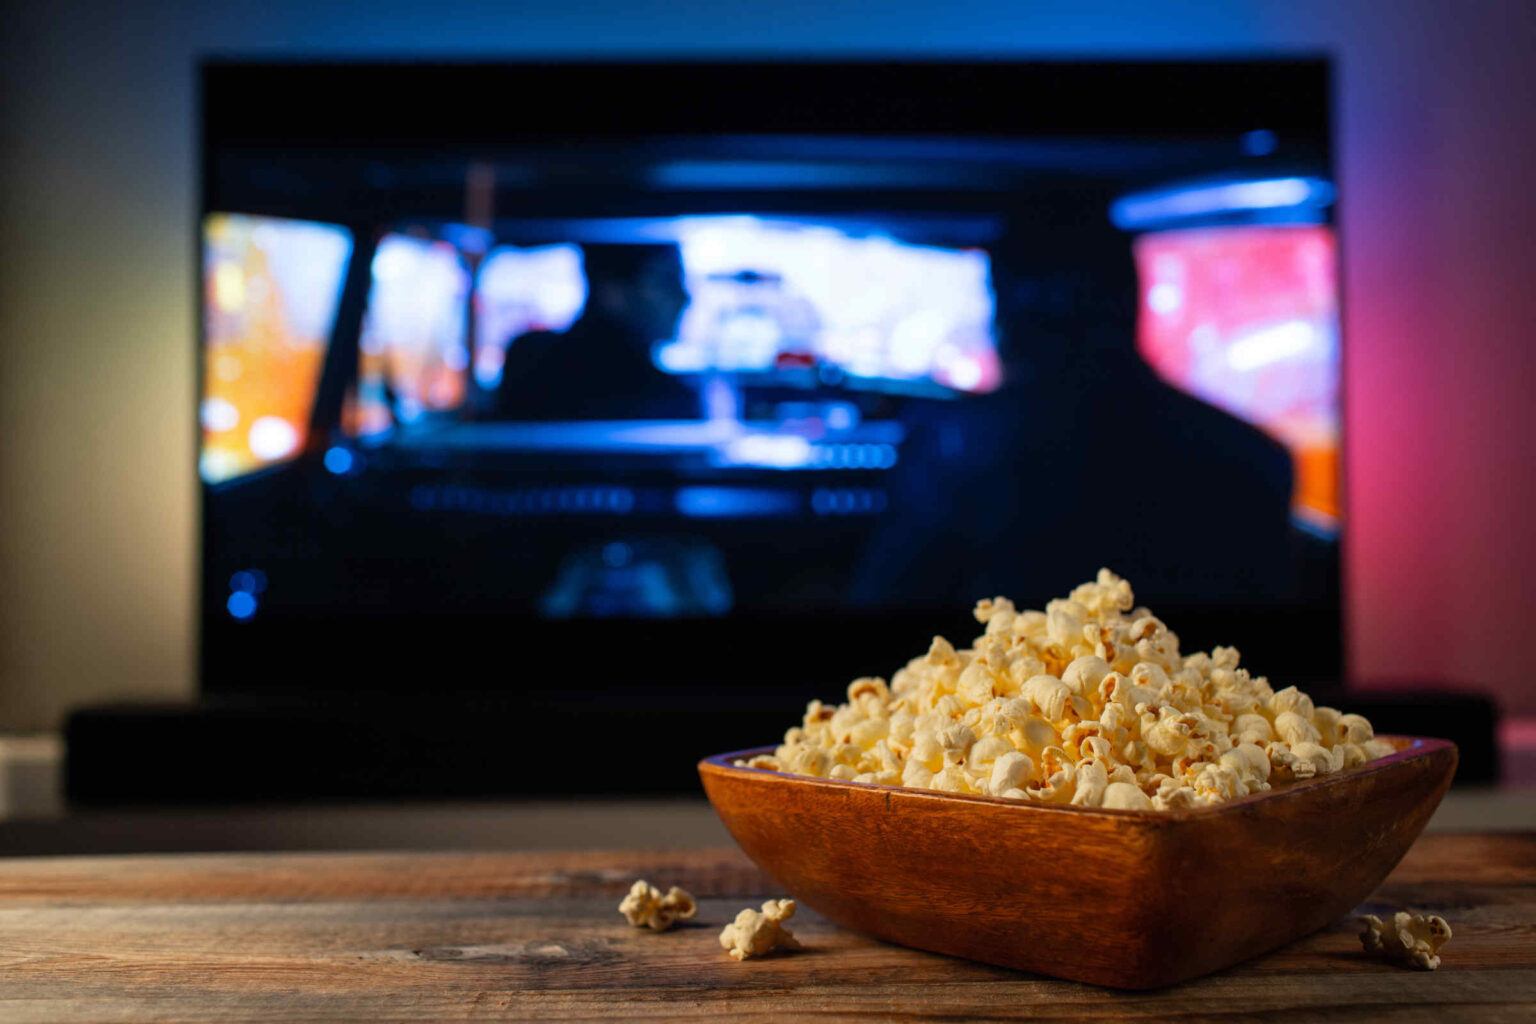 From popcorn and pretzels to candy and a drink, here are the epic snacks necessary for taking your movie watching experience to the next level!